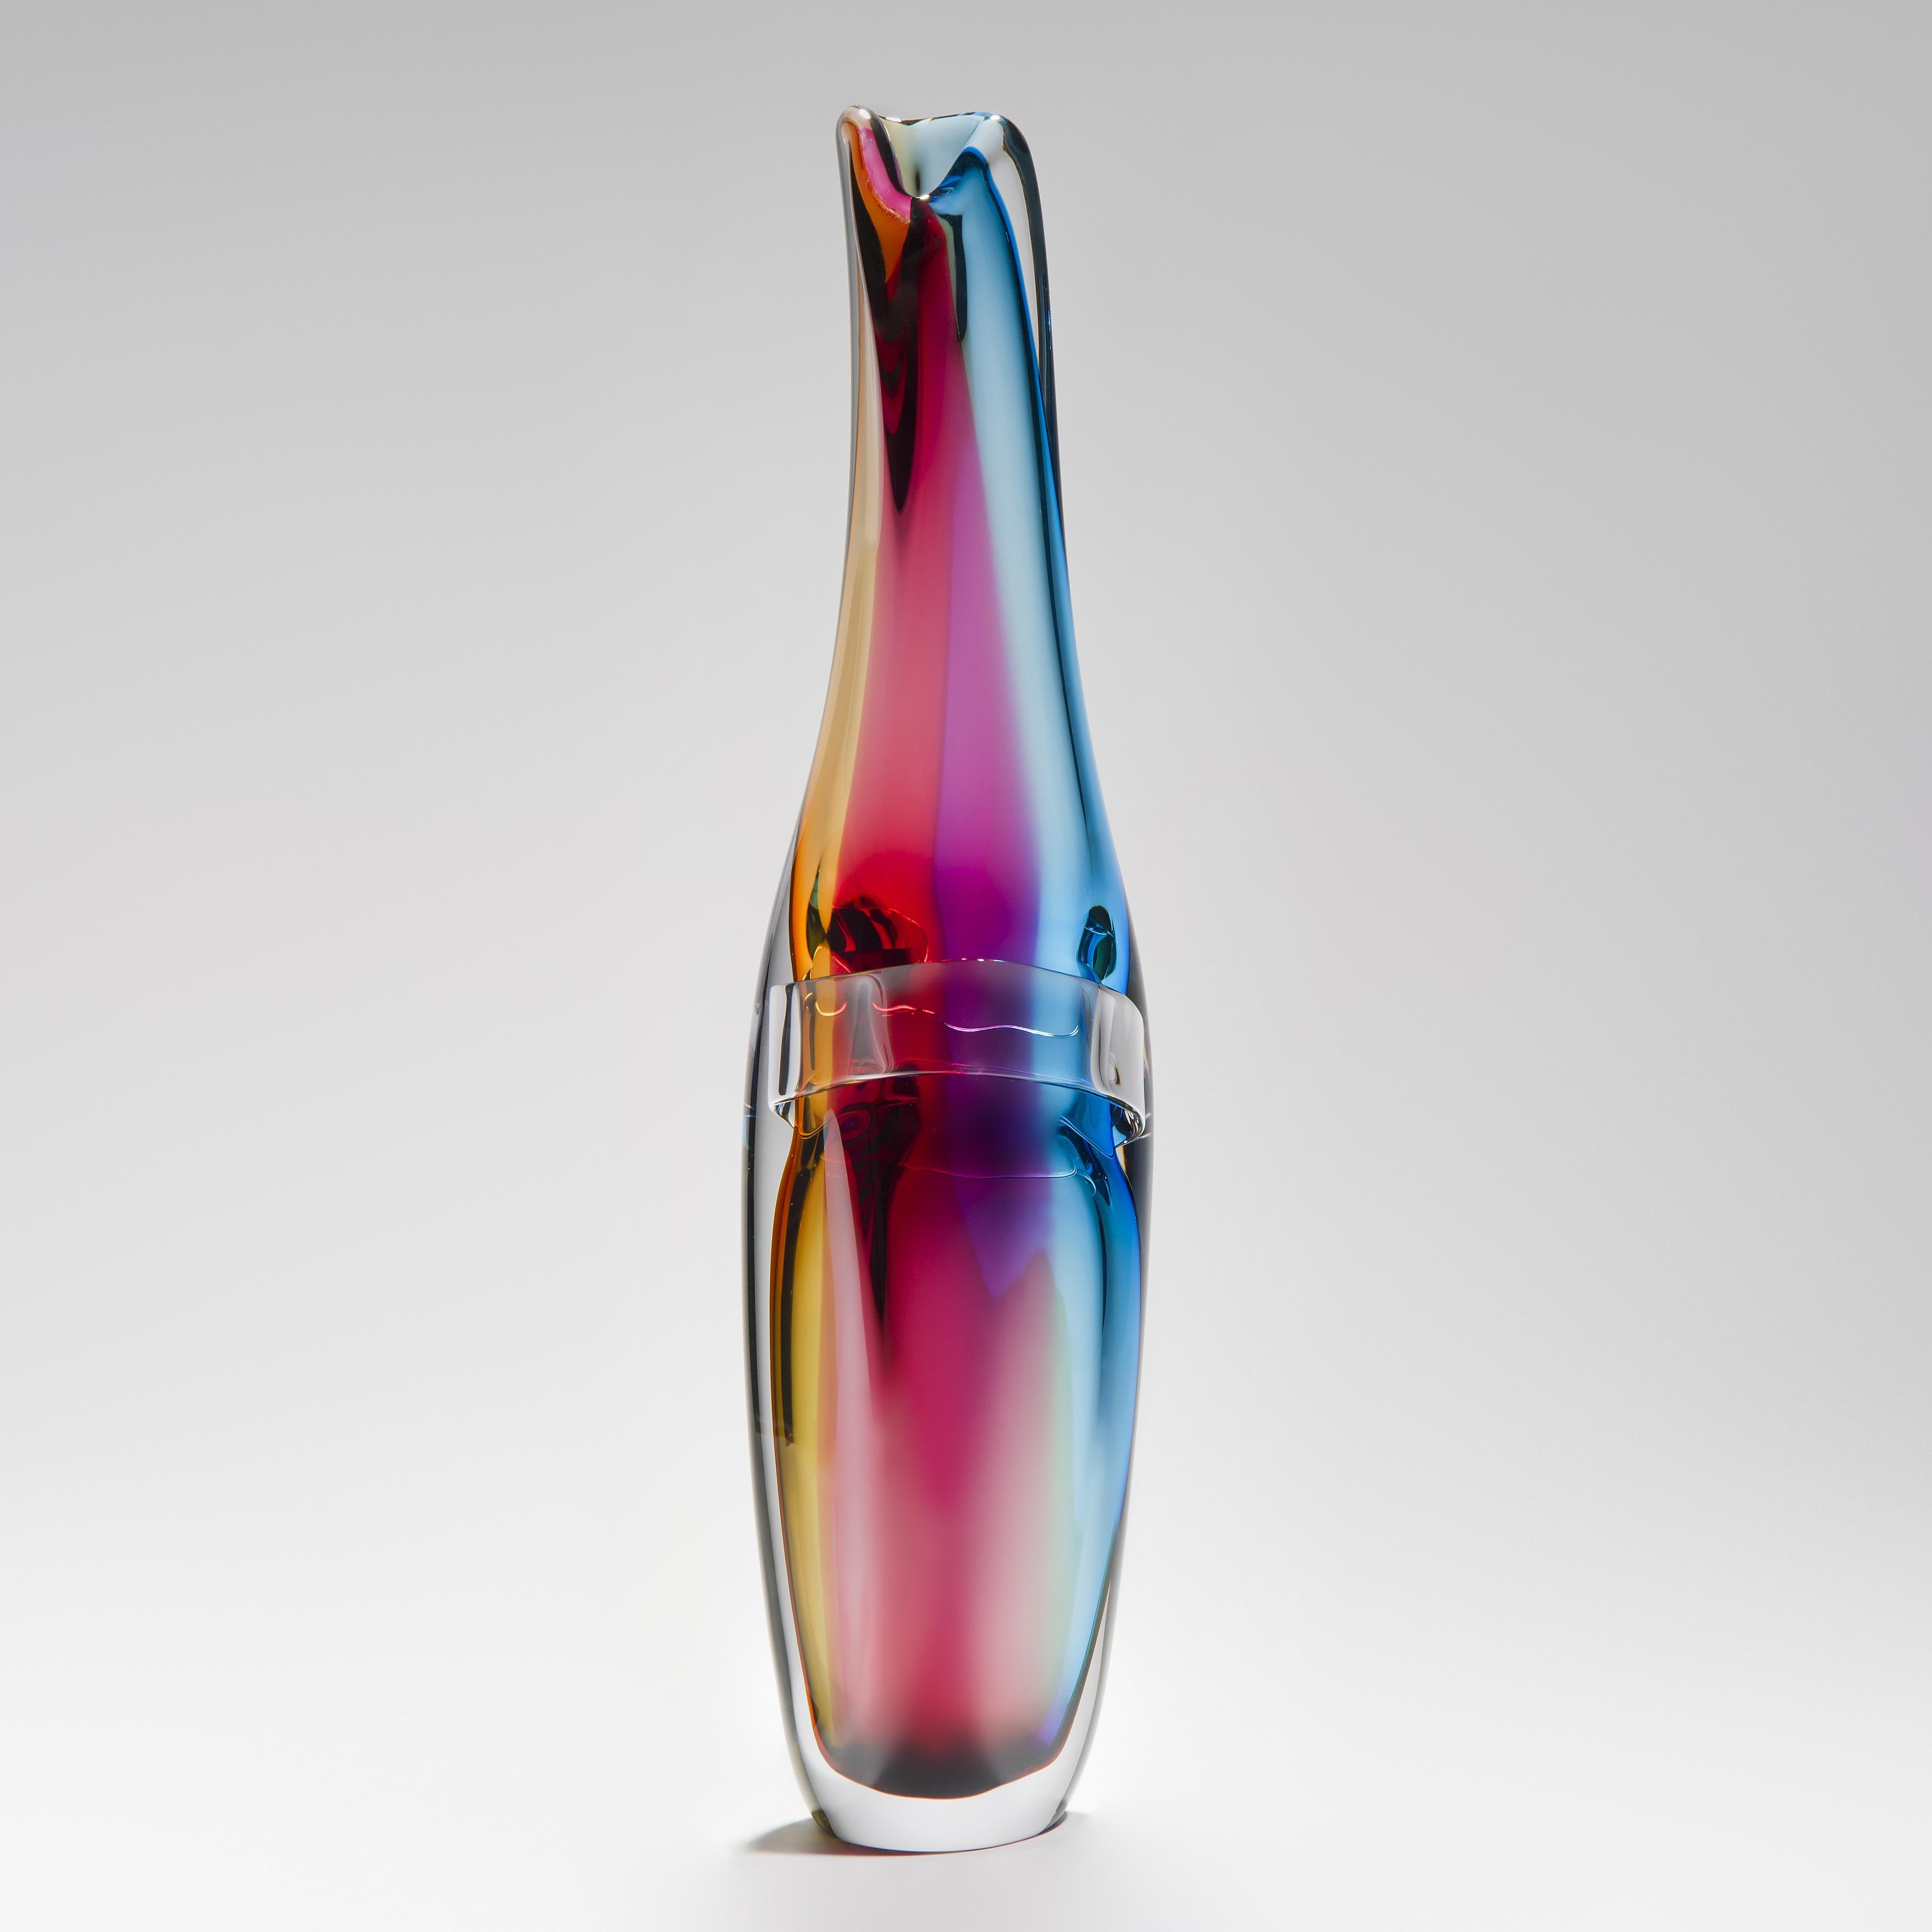 'Tricolarial 18' is a unique hand blown sculptural vase by the British artist Vic Bamforth. Blown in amber, red, purple and blue colored glass which are encased in clear glass to create this stunning piece. With soft, twisting lines, the form has